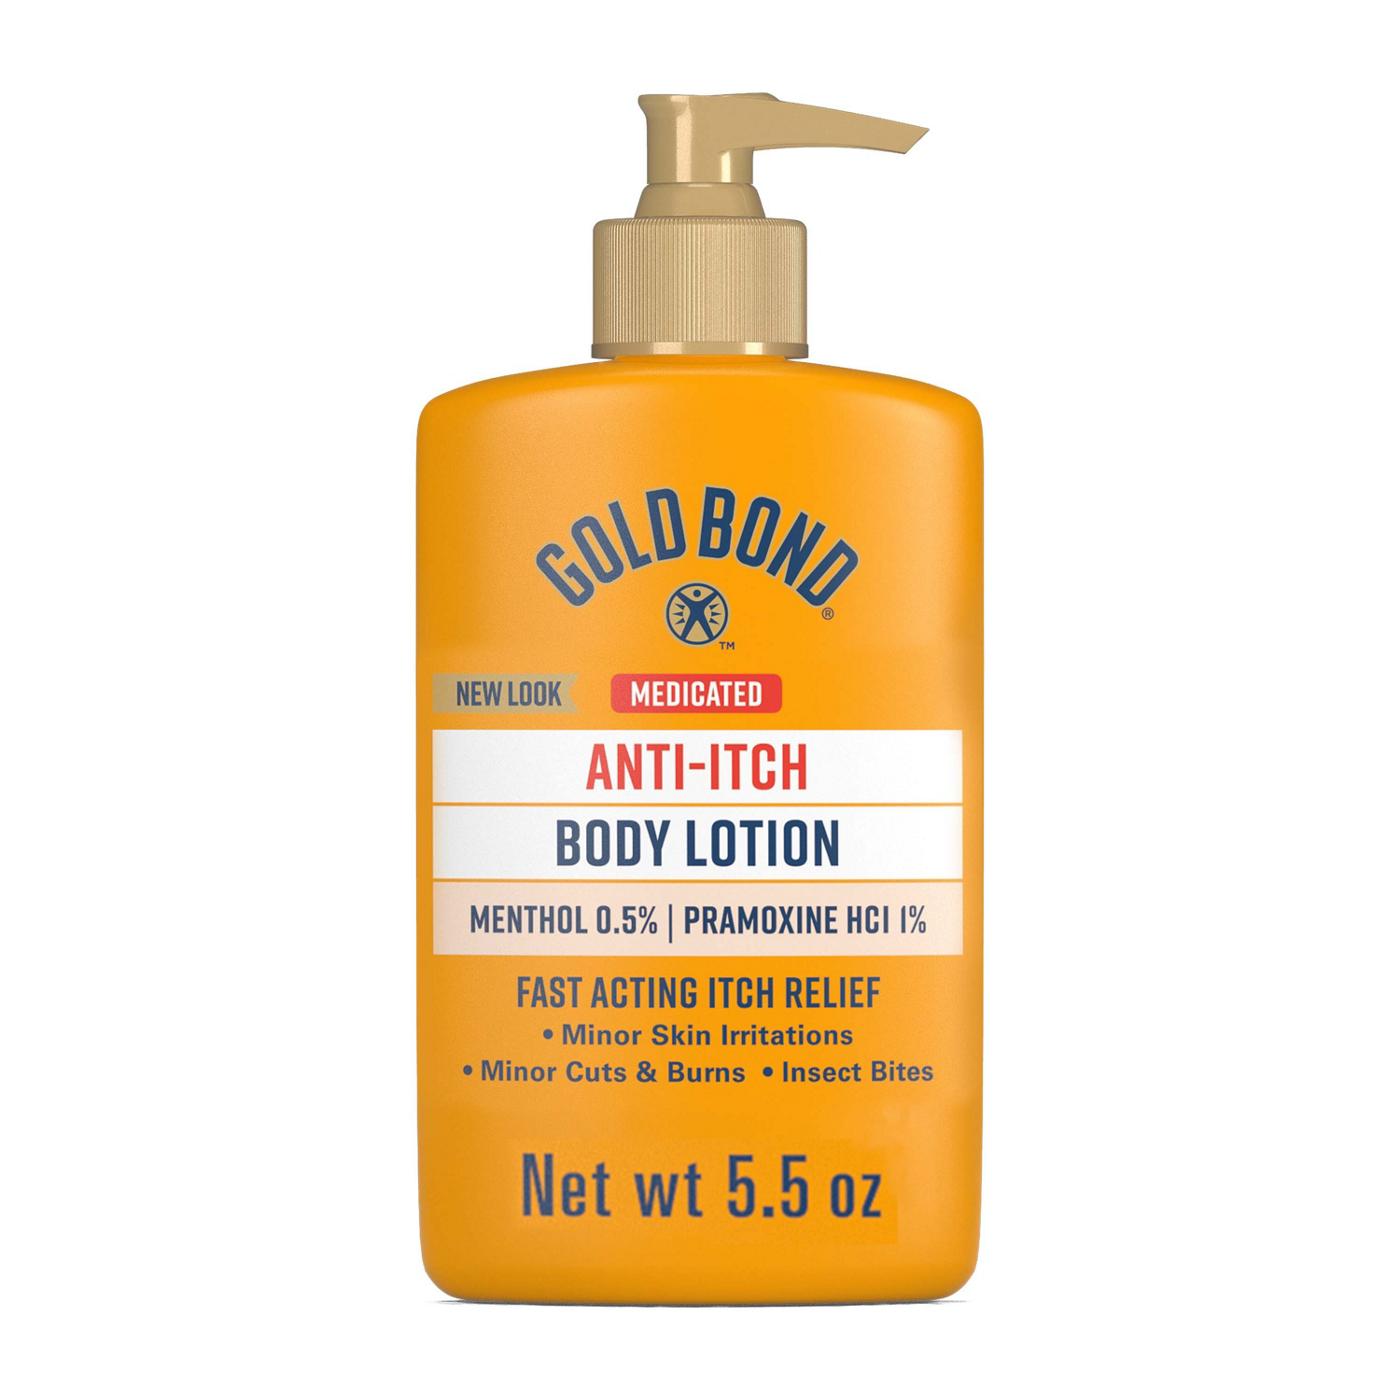 Gold Bond Medicated Anti-Itch Body Lotion; image 1 of 5